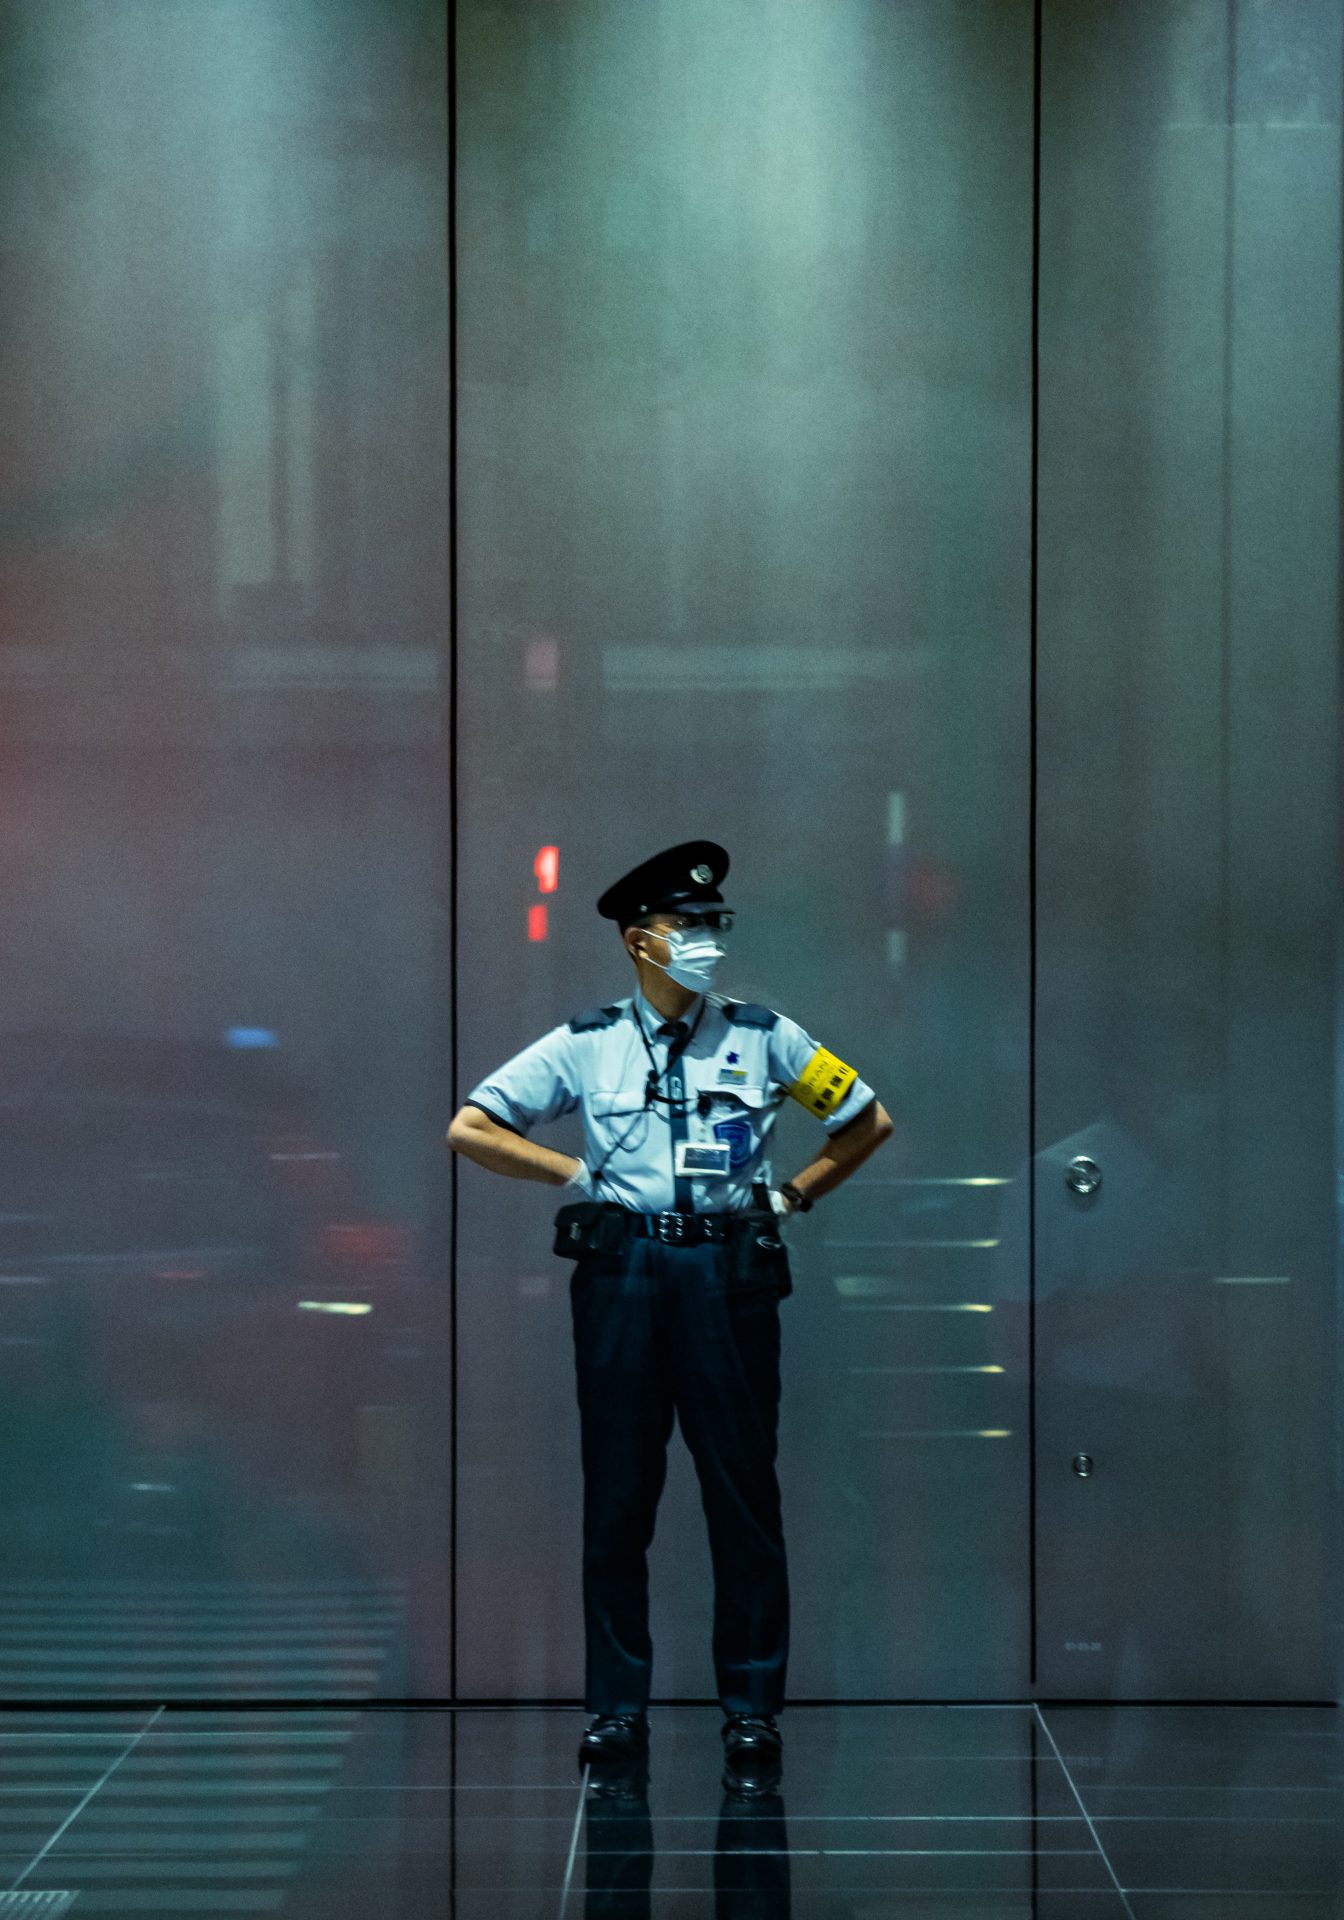 posing security guard with the reflections on the big glass windows